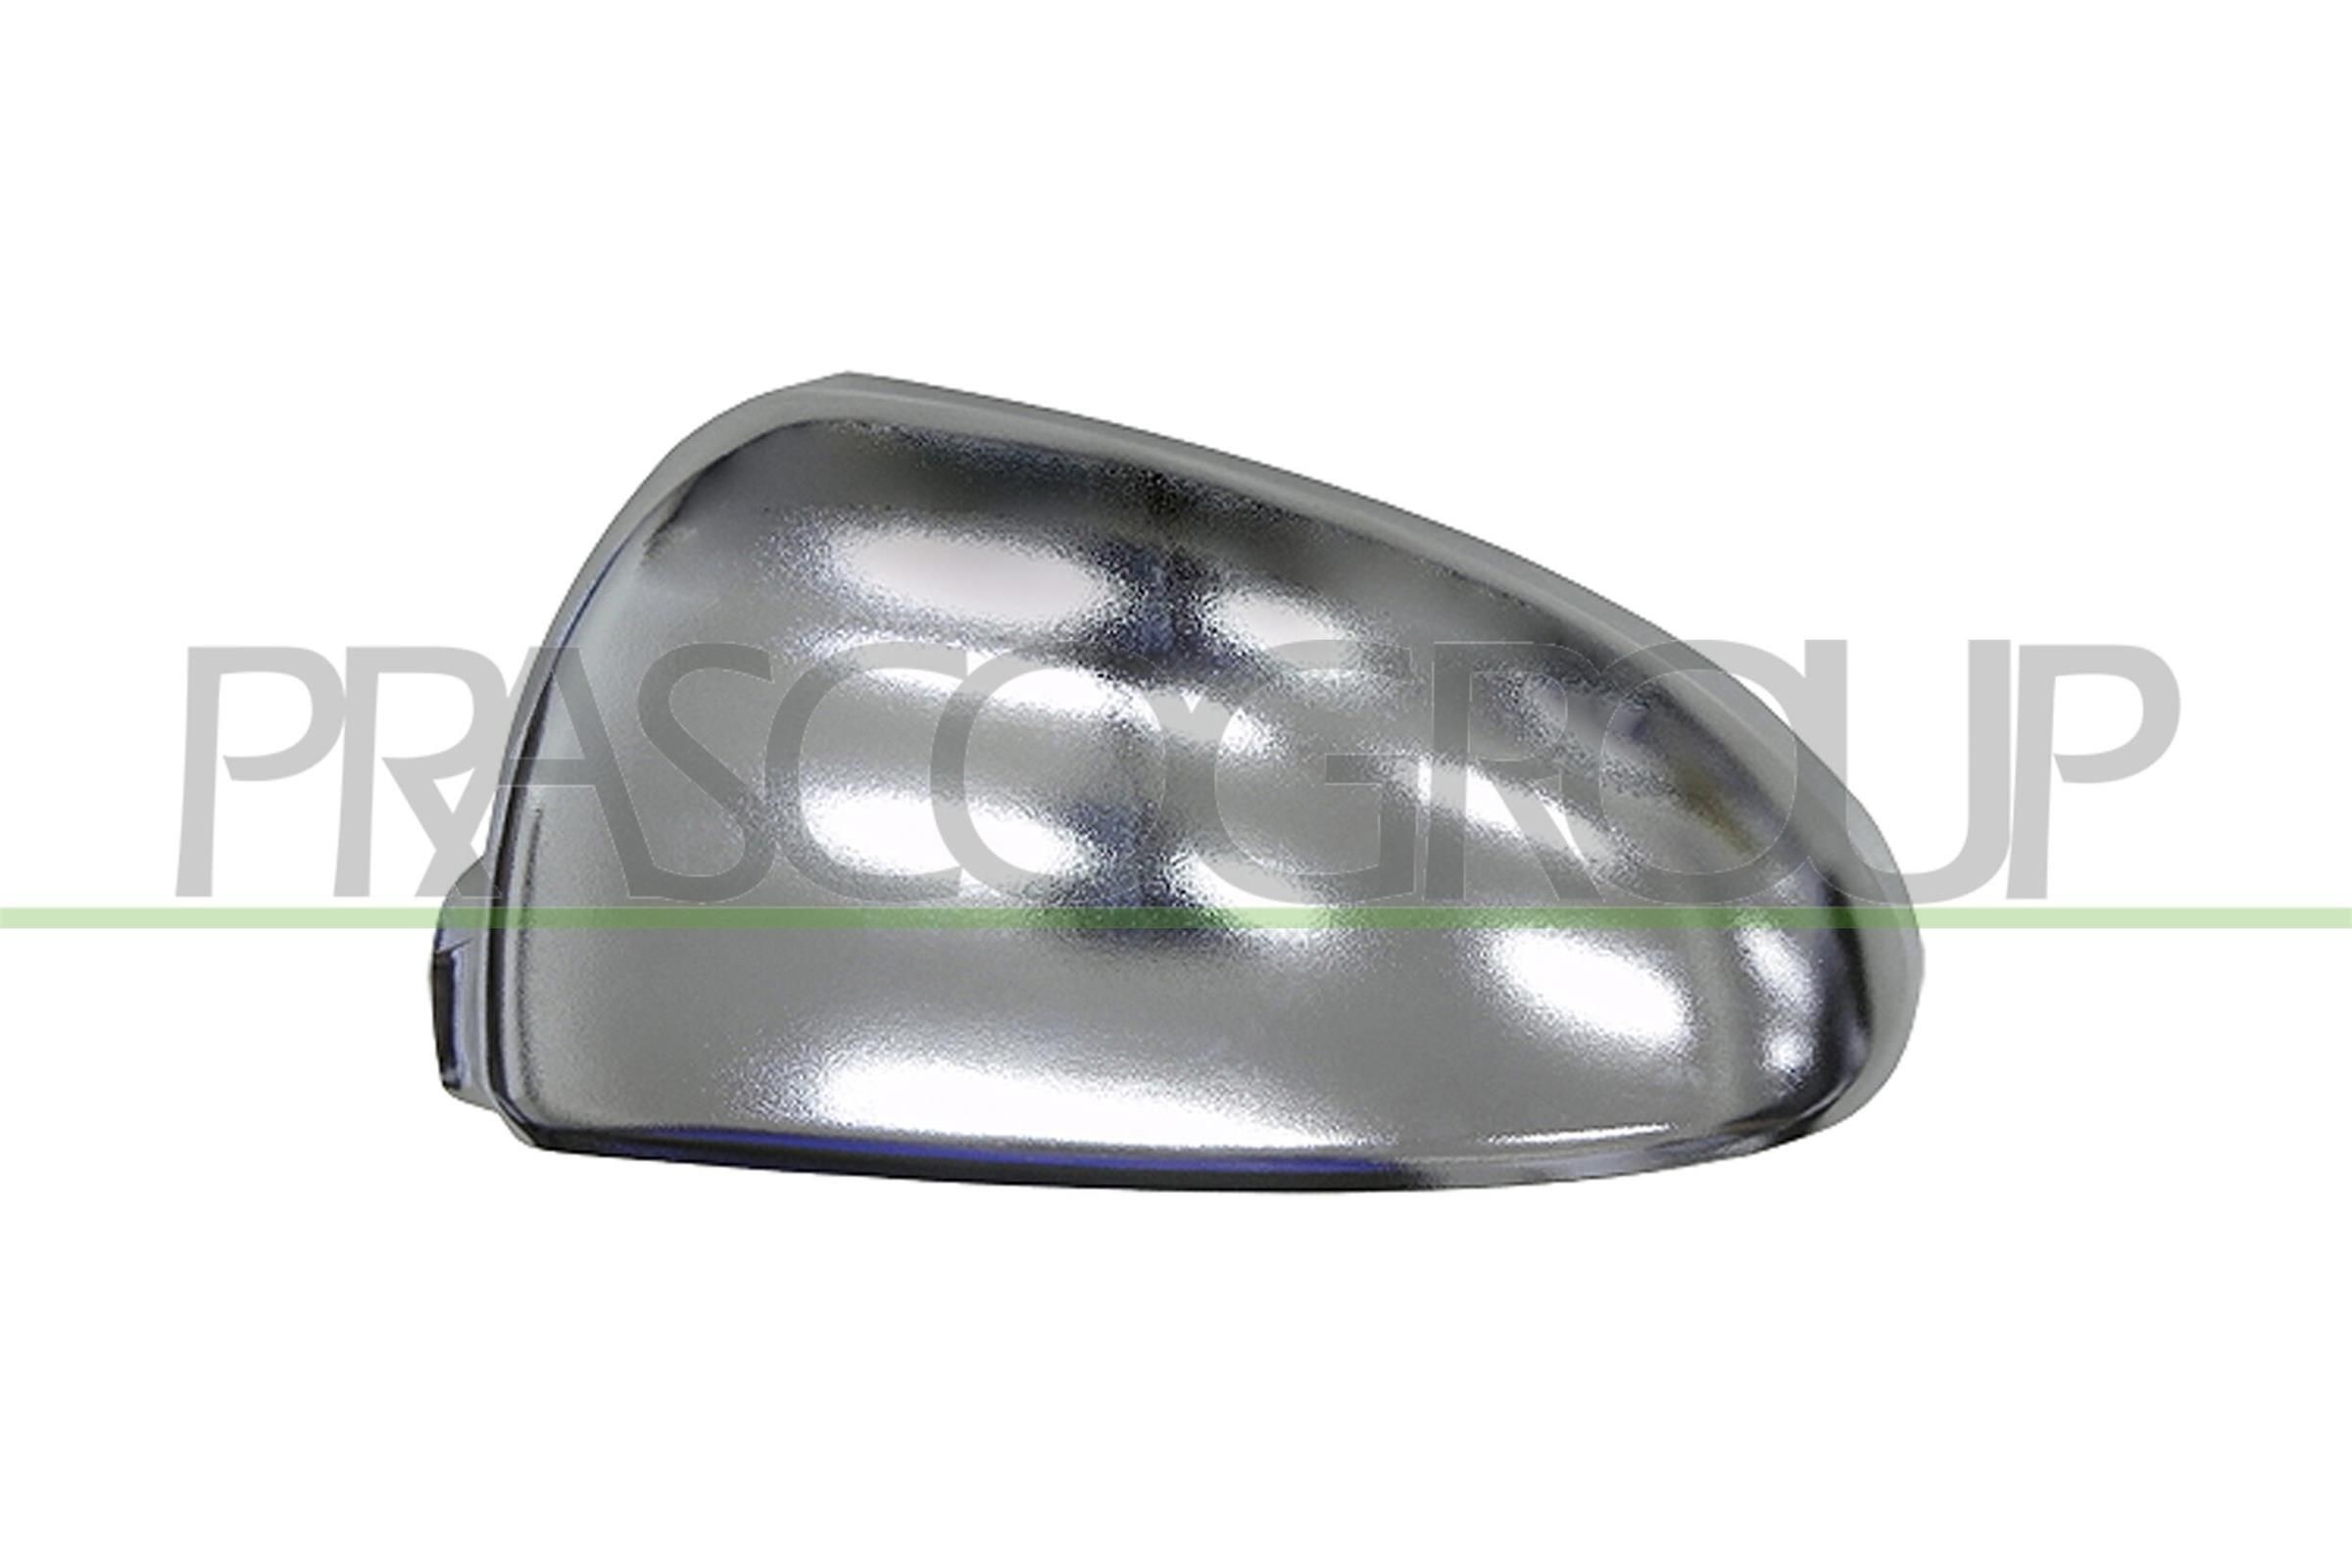 Smart Cover, outside mirror PRASCO ME3057416 at a good price